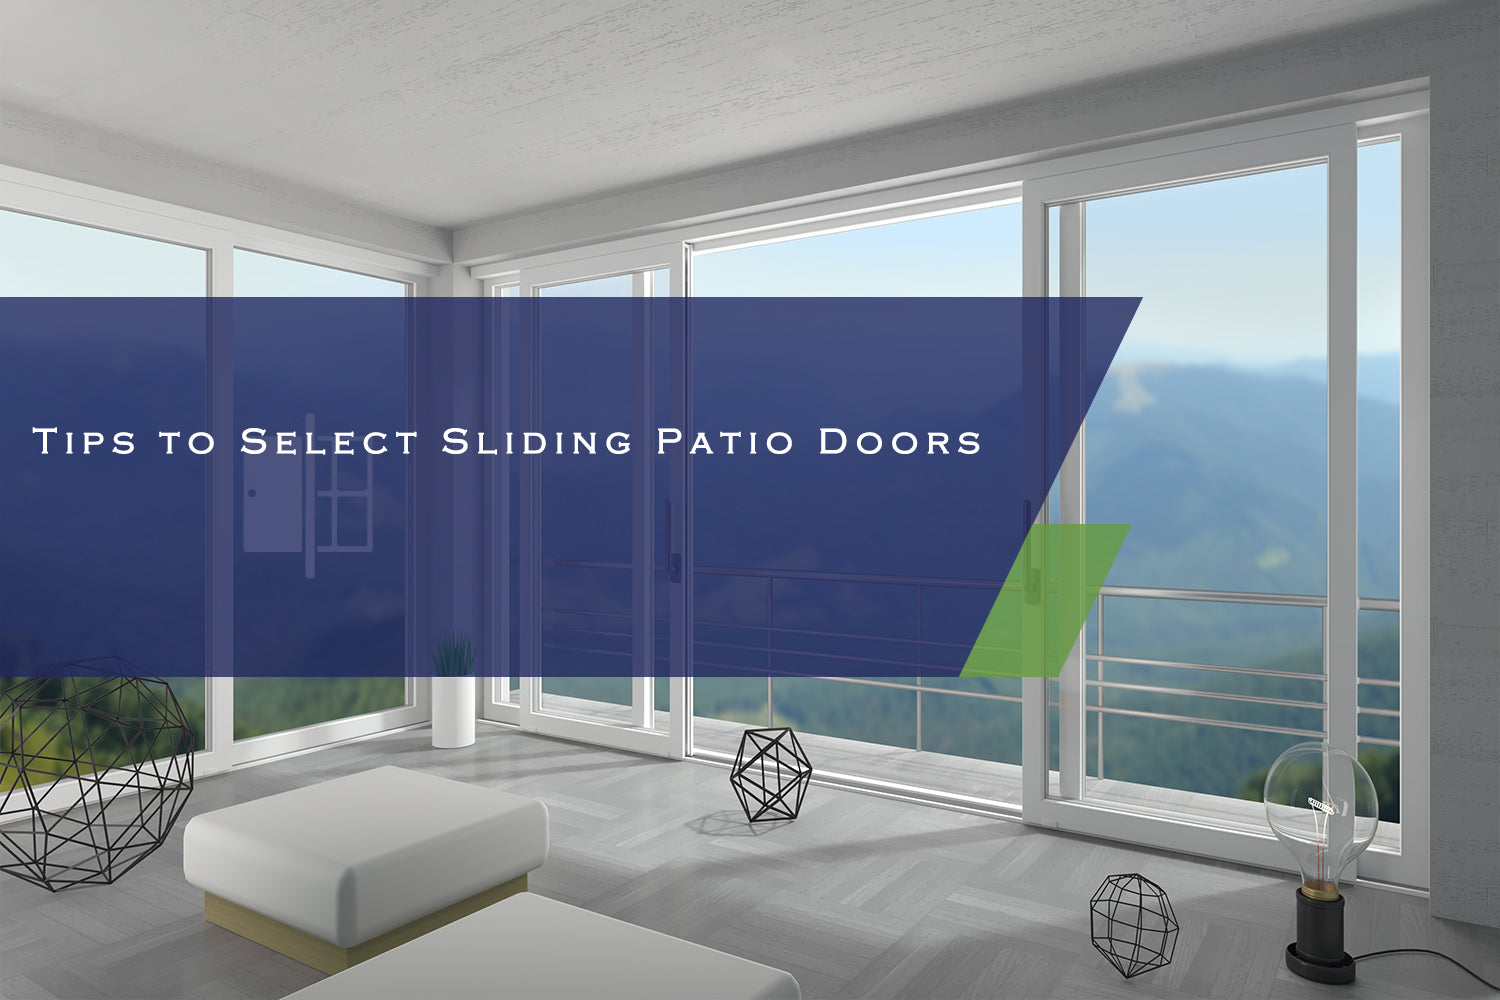 Tips to Select Sliding Patio Doors